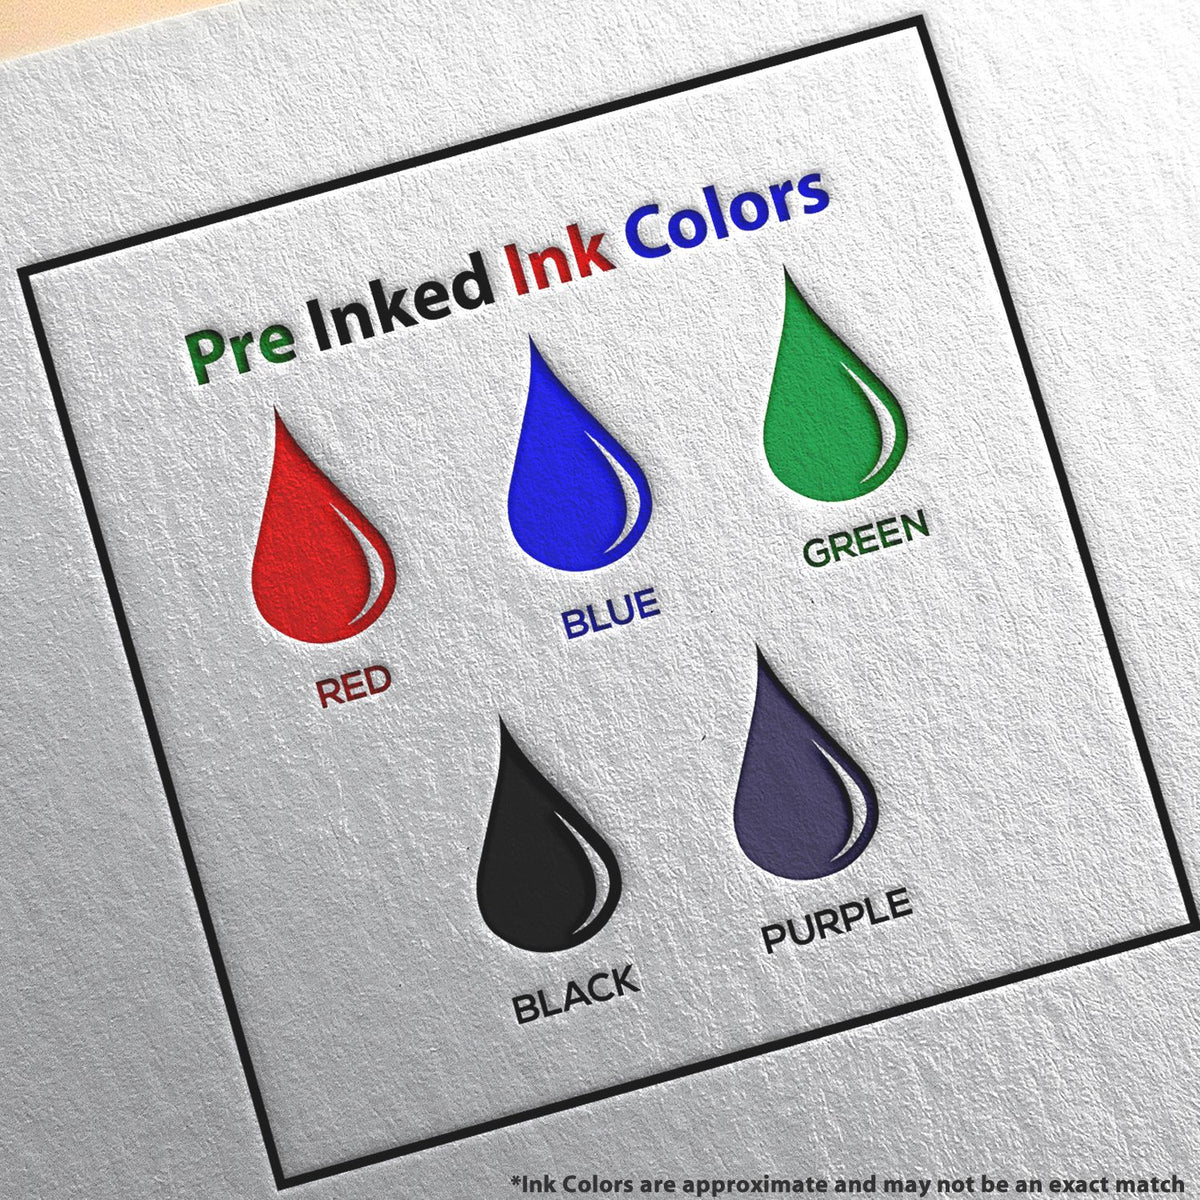 A picture showing the different ink colors or hues available for the MaxLight Premium Pre-Inked Utah State Seal Notarial Stamp product.